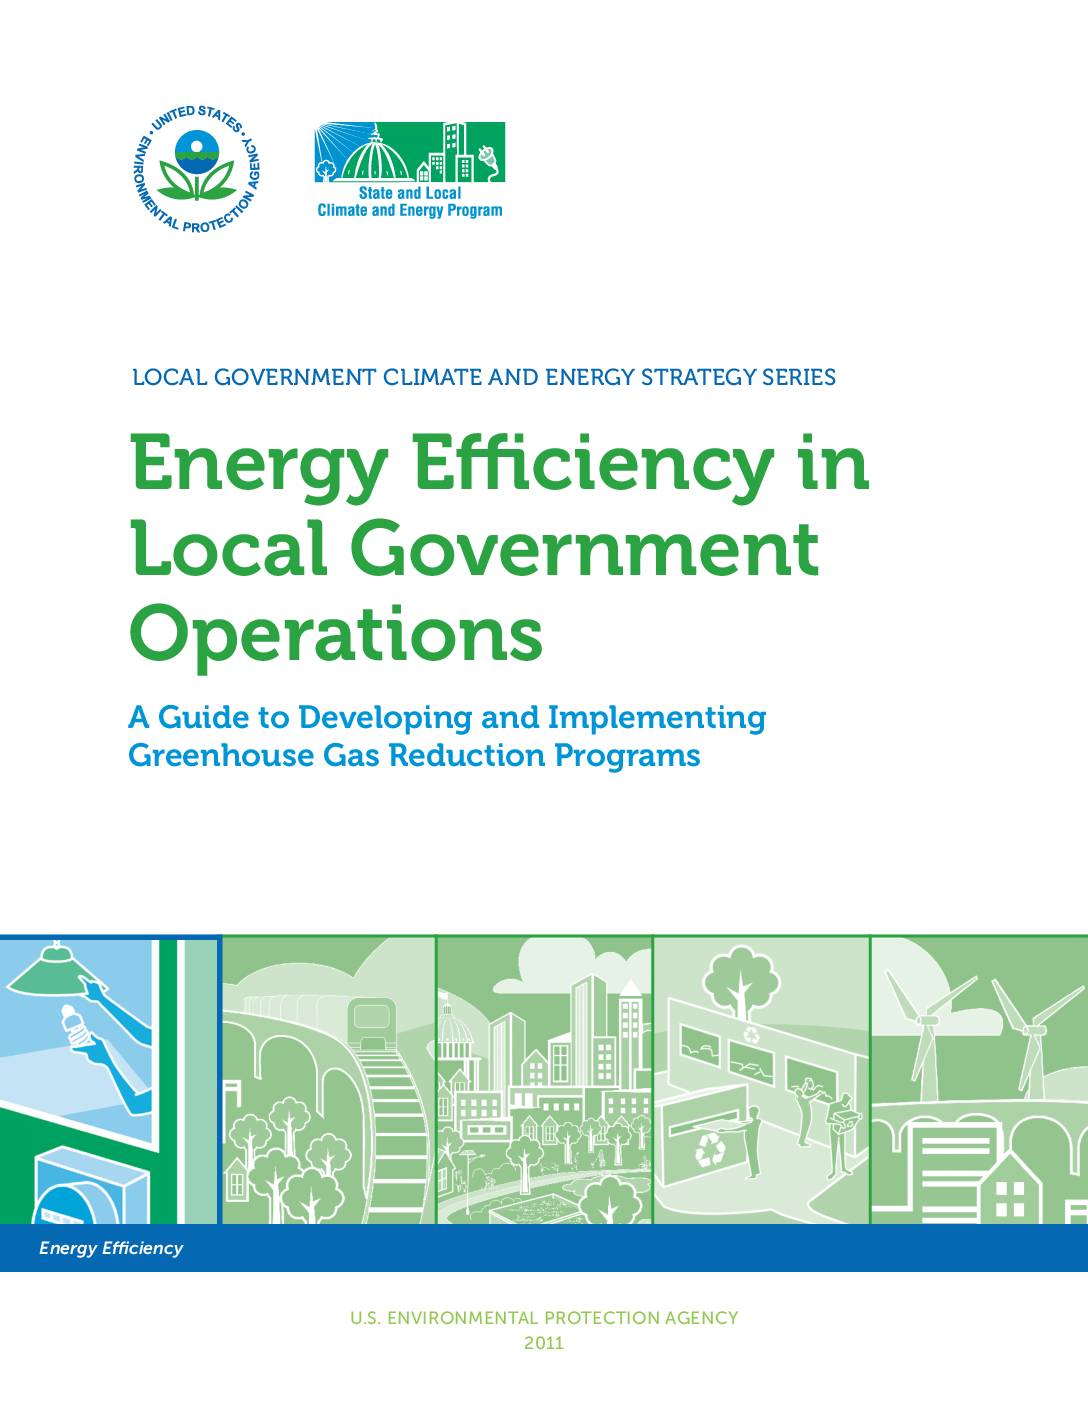 Energy Efficiency in Local Government Operations: a Guide to Developing and Implementing Greenhouse Gas Reduction Programs